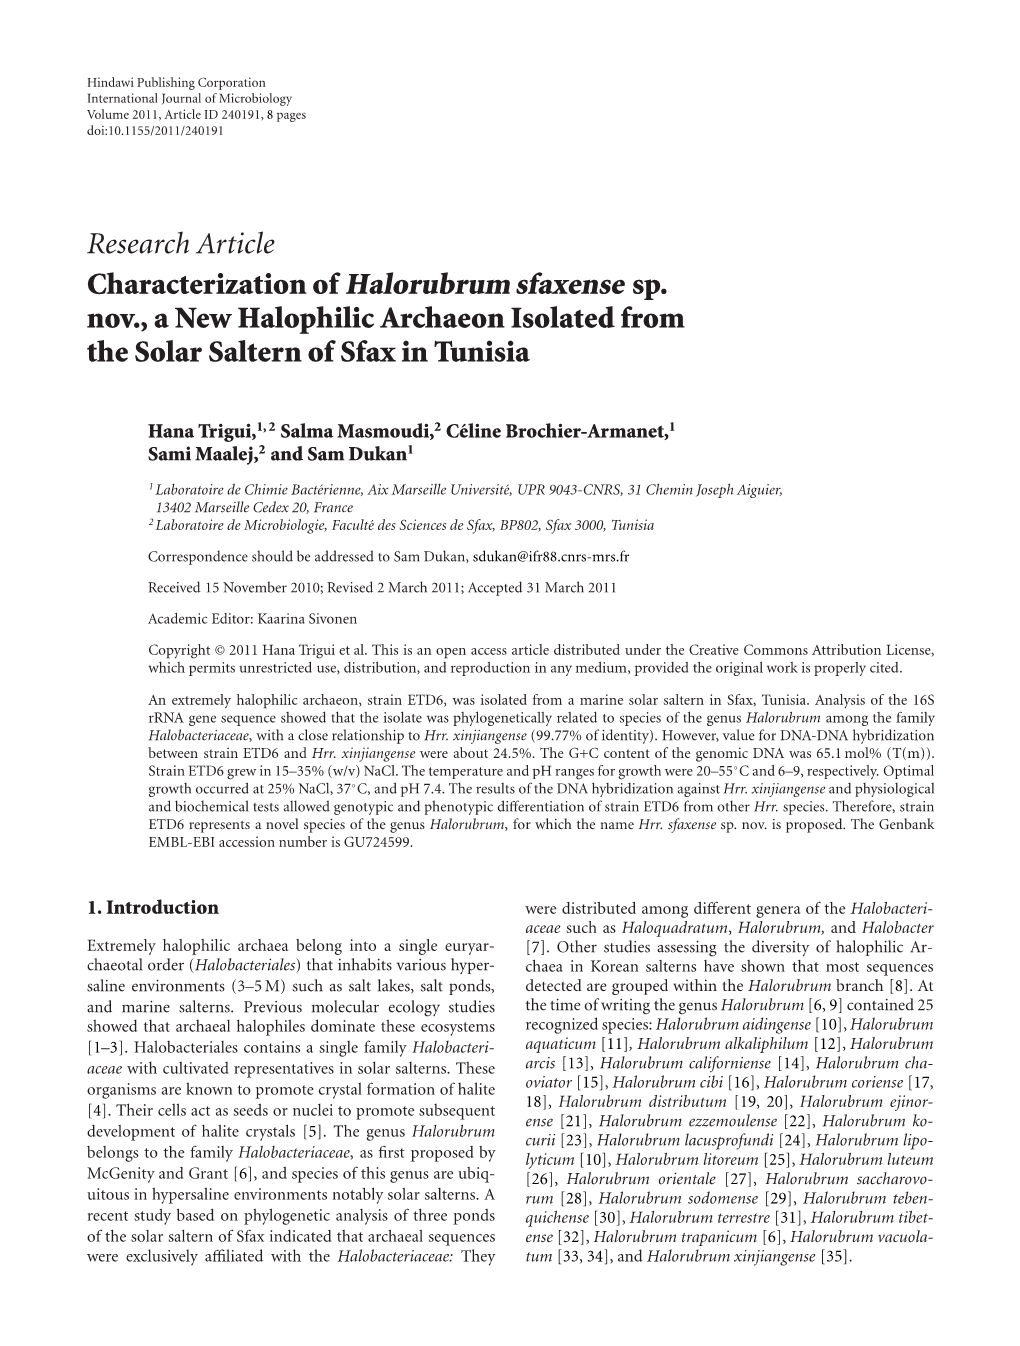 Characterization of Halorubrum Sfaxense Sp. Nov., a New Halophilic Archaeon Isolated from the Solar Saltern of Sfax in Tunisia